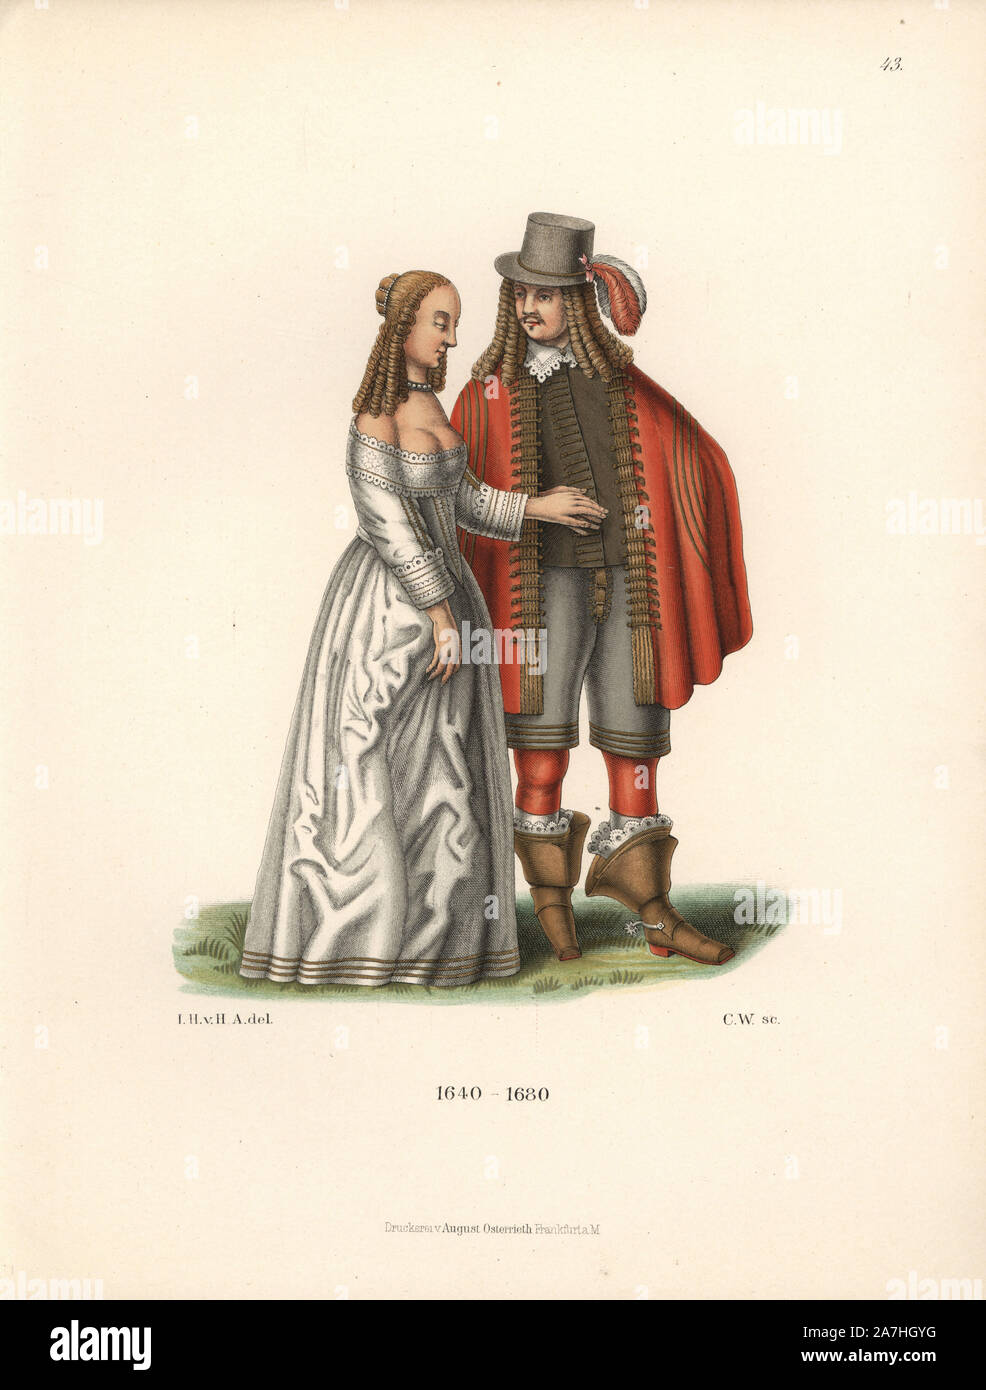 Dutch couple in fashions of the end of the 30 Years War, from an oil painting of a pleasure garden by Palamedes Steevens. Chromolithograph from Hefner-Alteneck's 'Costumes, Artworks and Appliances from the Middle Ages to the 17th Century,' Frankfurt, 1889. Illustration by Dr. Jakob Heinrich von Hefner-Alteneck, lithograph by CW and published by Heinrich Keller. Dr. Hefner-Alteneck (1811 - 1903) was a German curator, archaeologist, art historian, illustrator and etcher. Stock Photo